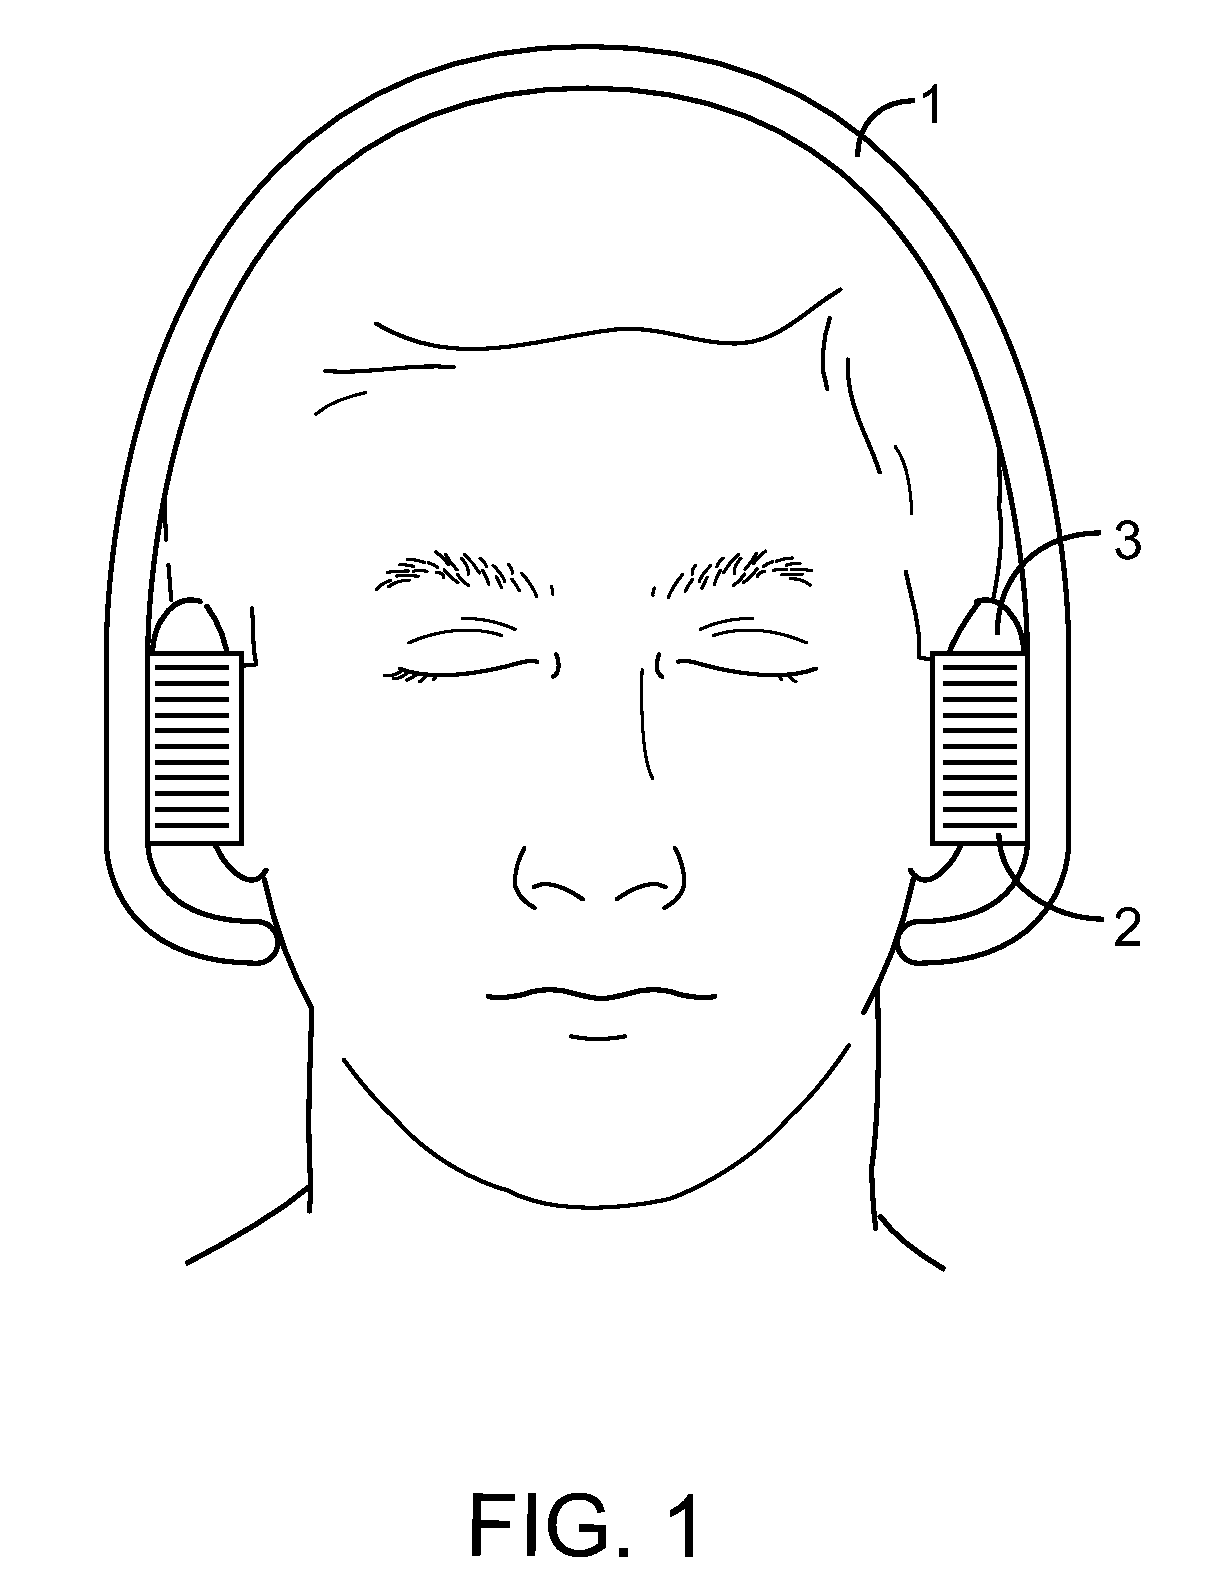 System and Method for the Simultaneous Bilateral Treatment of Target Tissues Within the Ears Using a Guide Block Structure